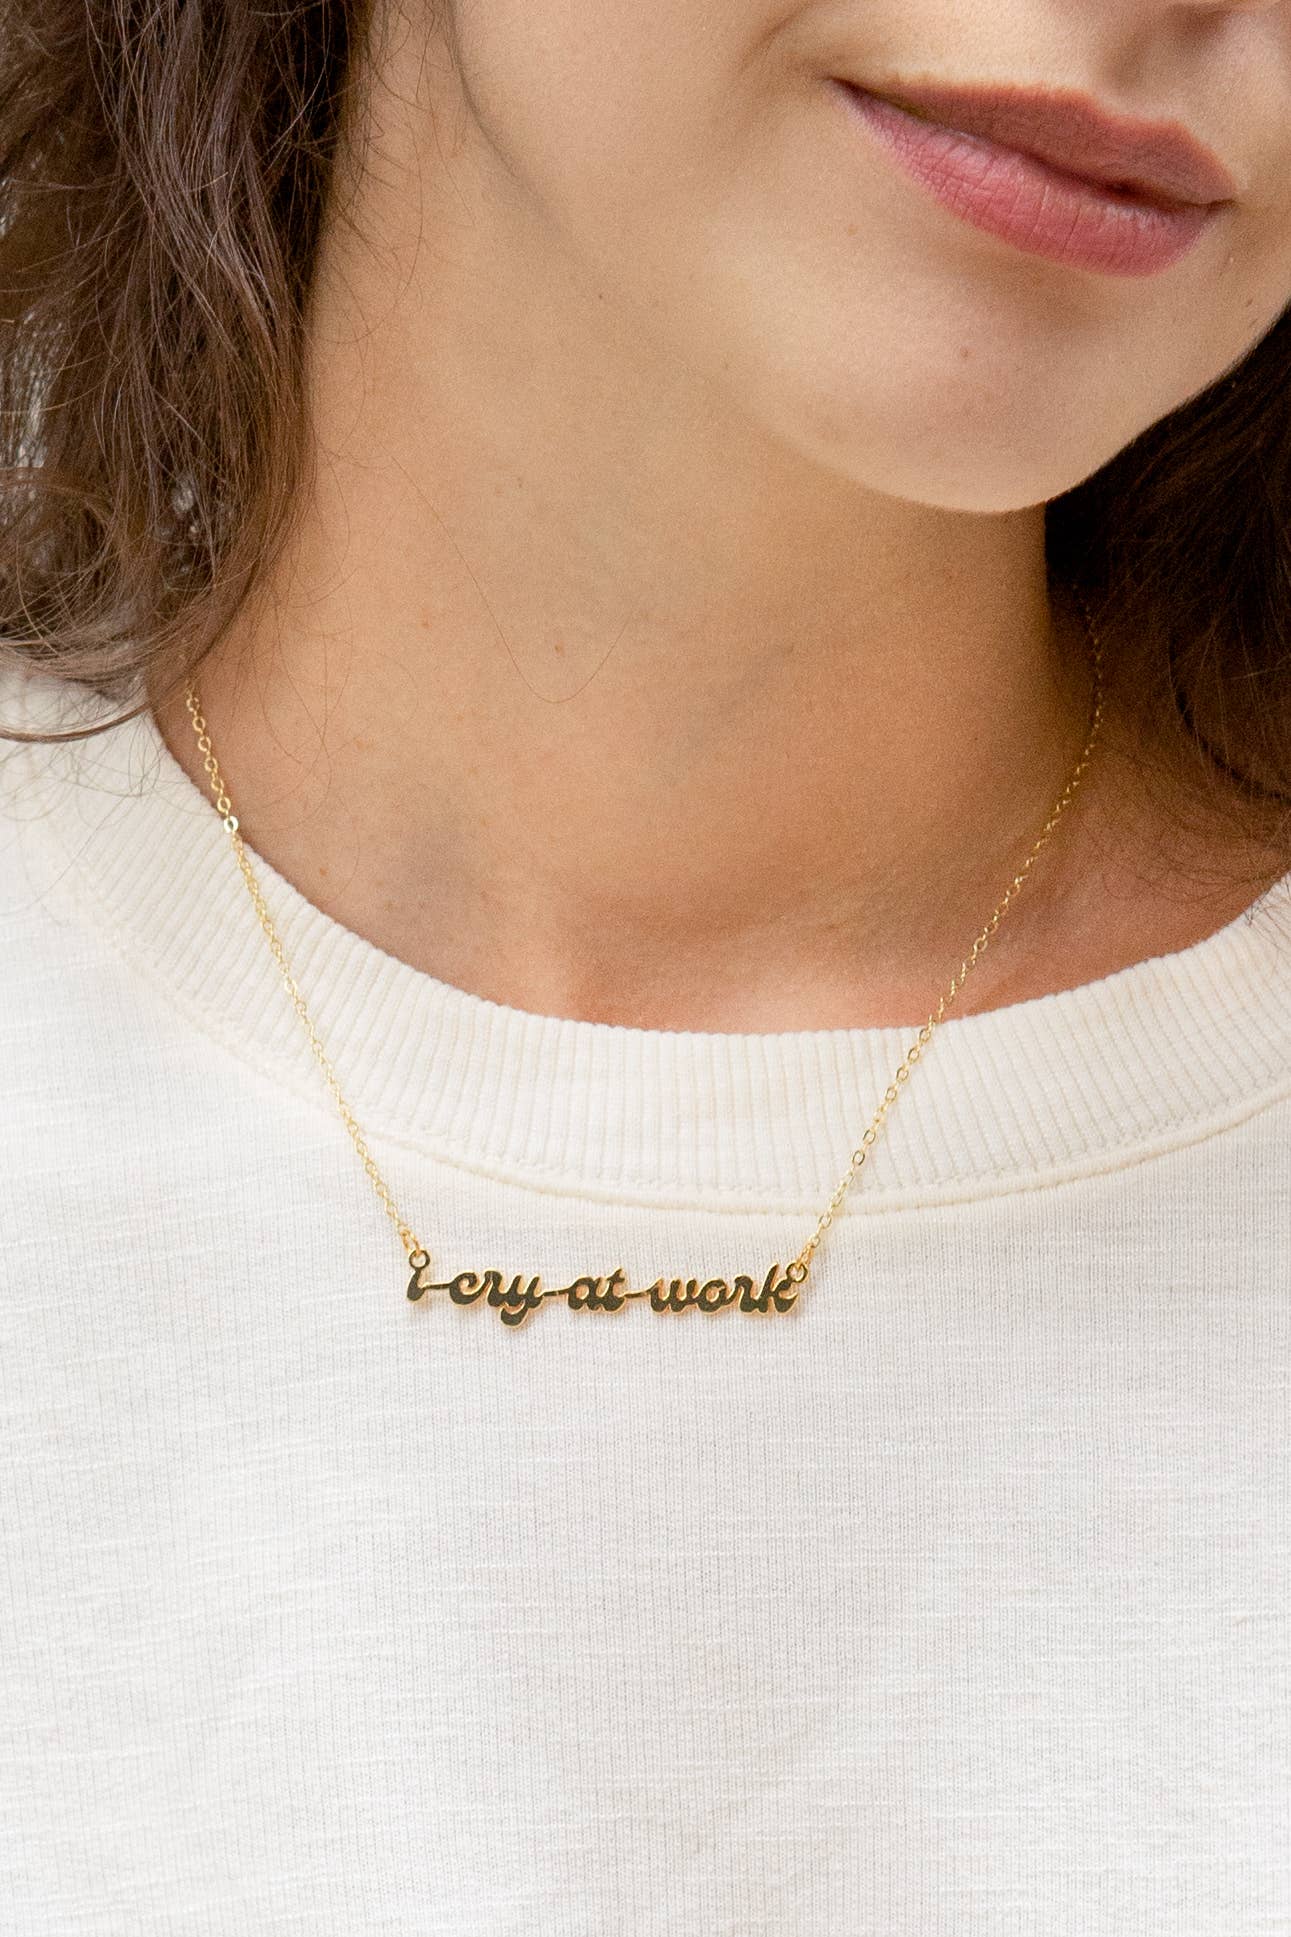 I Cry At Work 24k Gold Plated Necklace - Out of the Blue